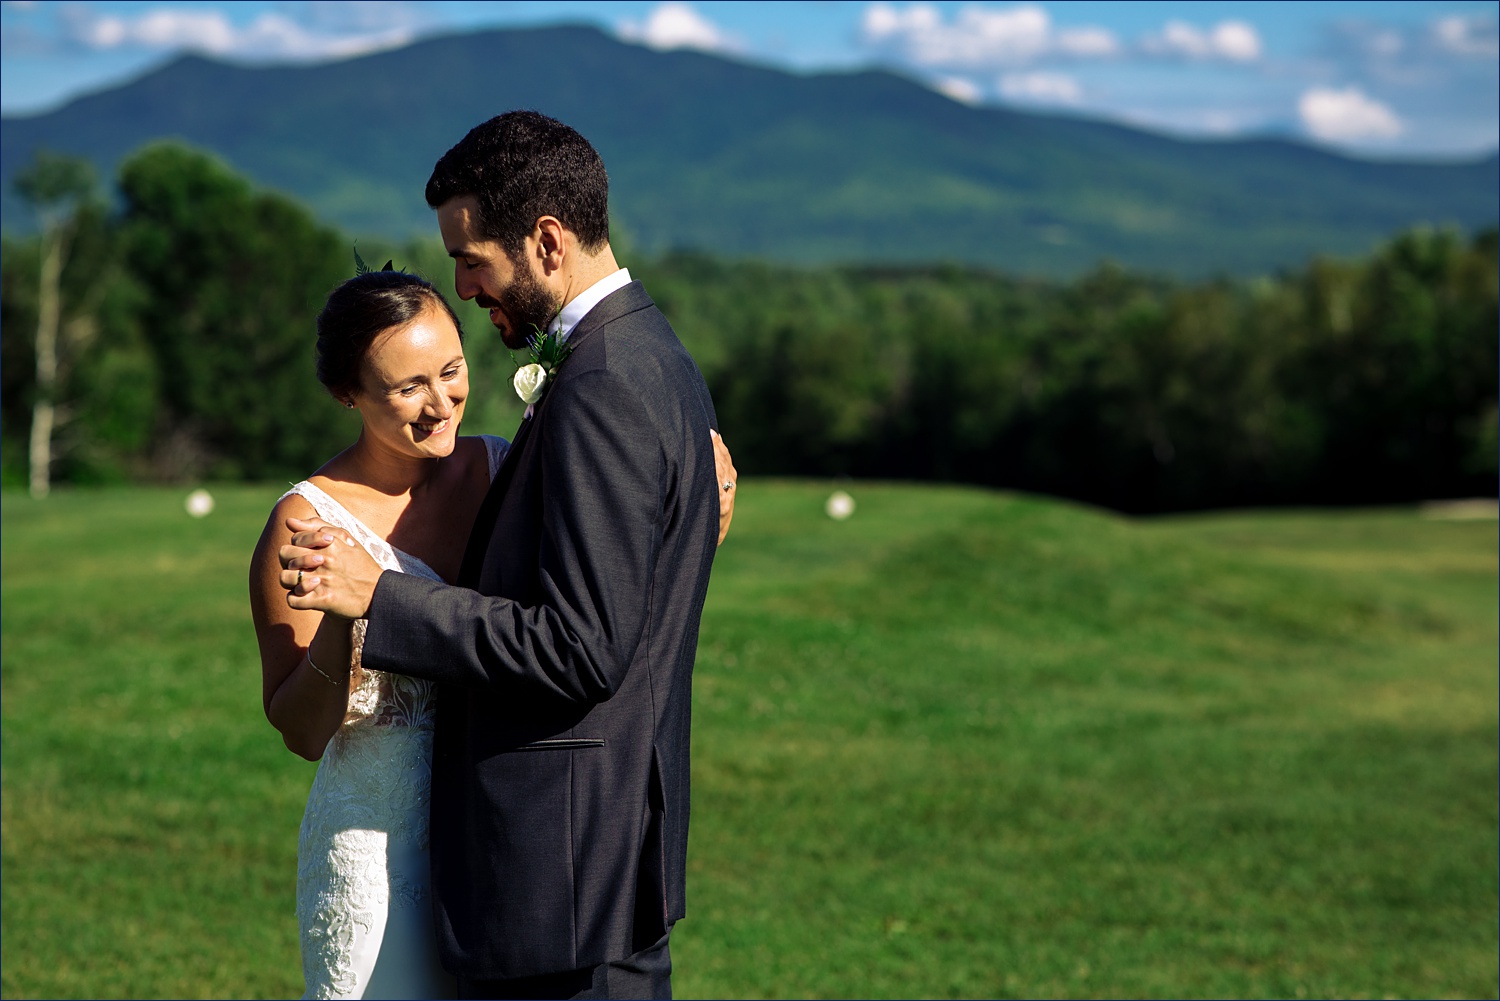 The newlyweds dance in front of the mountain range in Whitefield New Hampshire